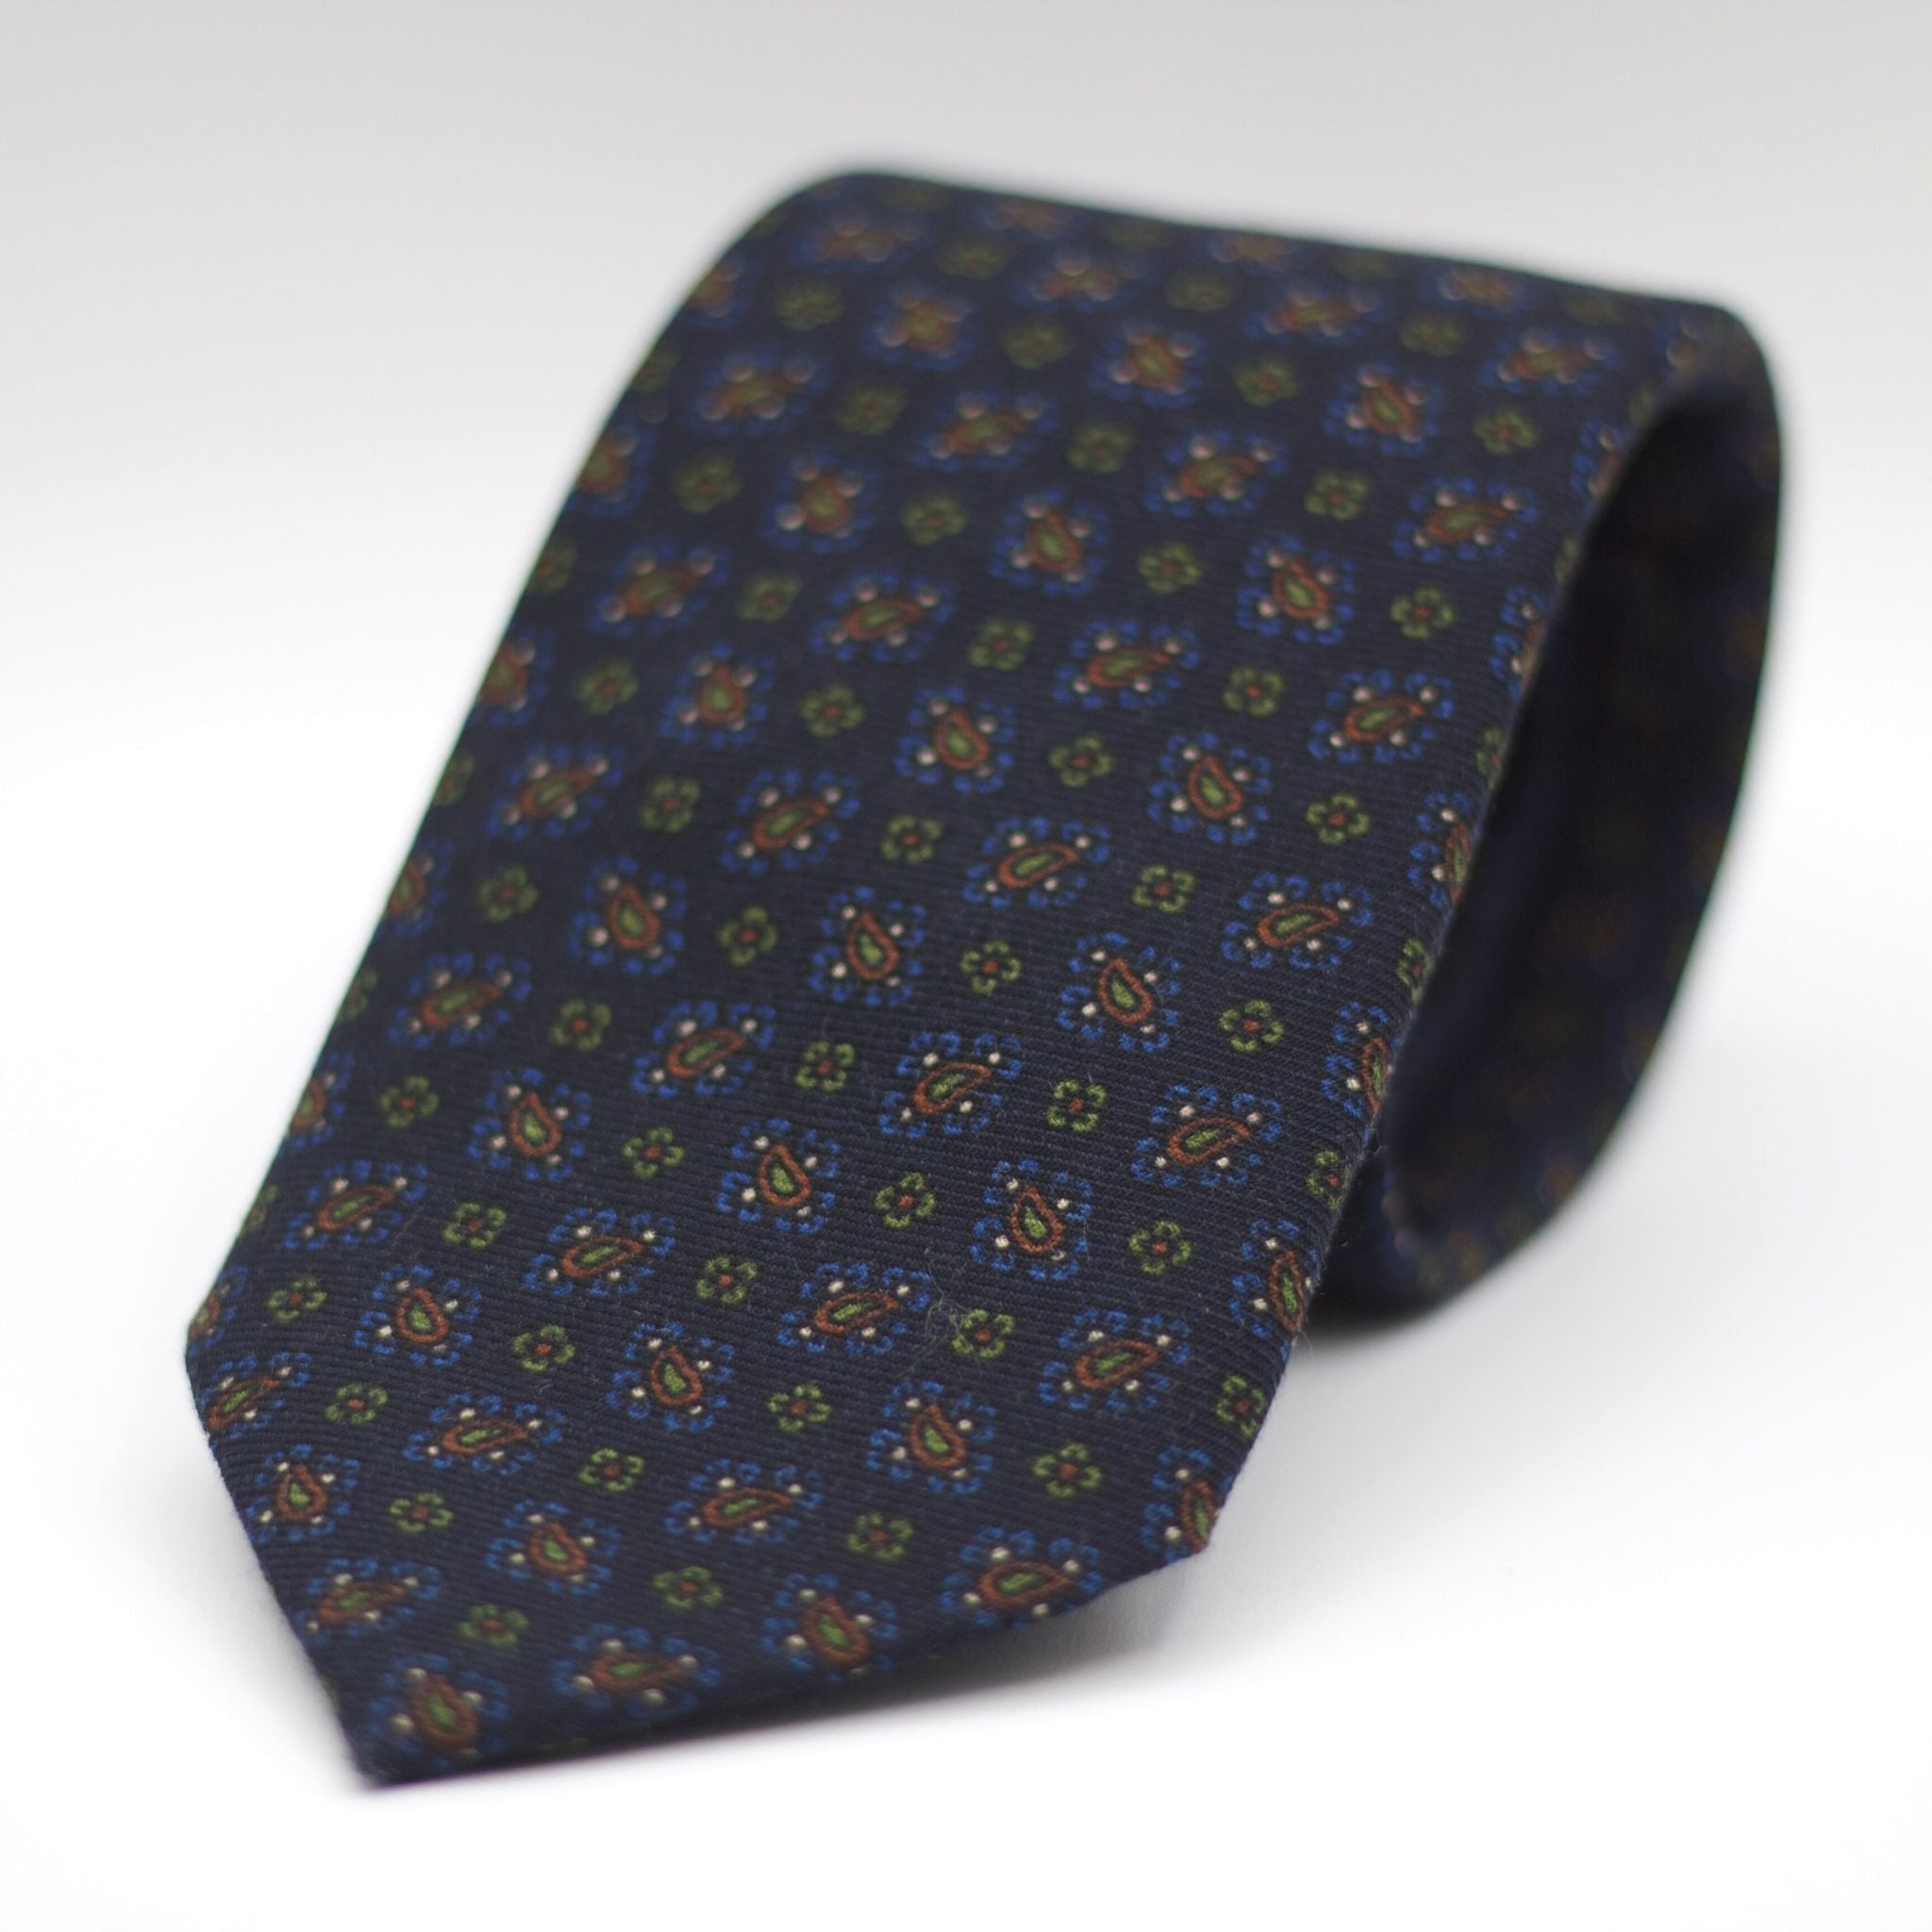 Holliday & Brown for Cruciani & Bella 100% Printed Wool  Self-Tipped Blue Navy, Green, Brown  and Light Blue Motif Tie  Handmade in Italy 8 cm x 148 cm